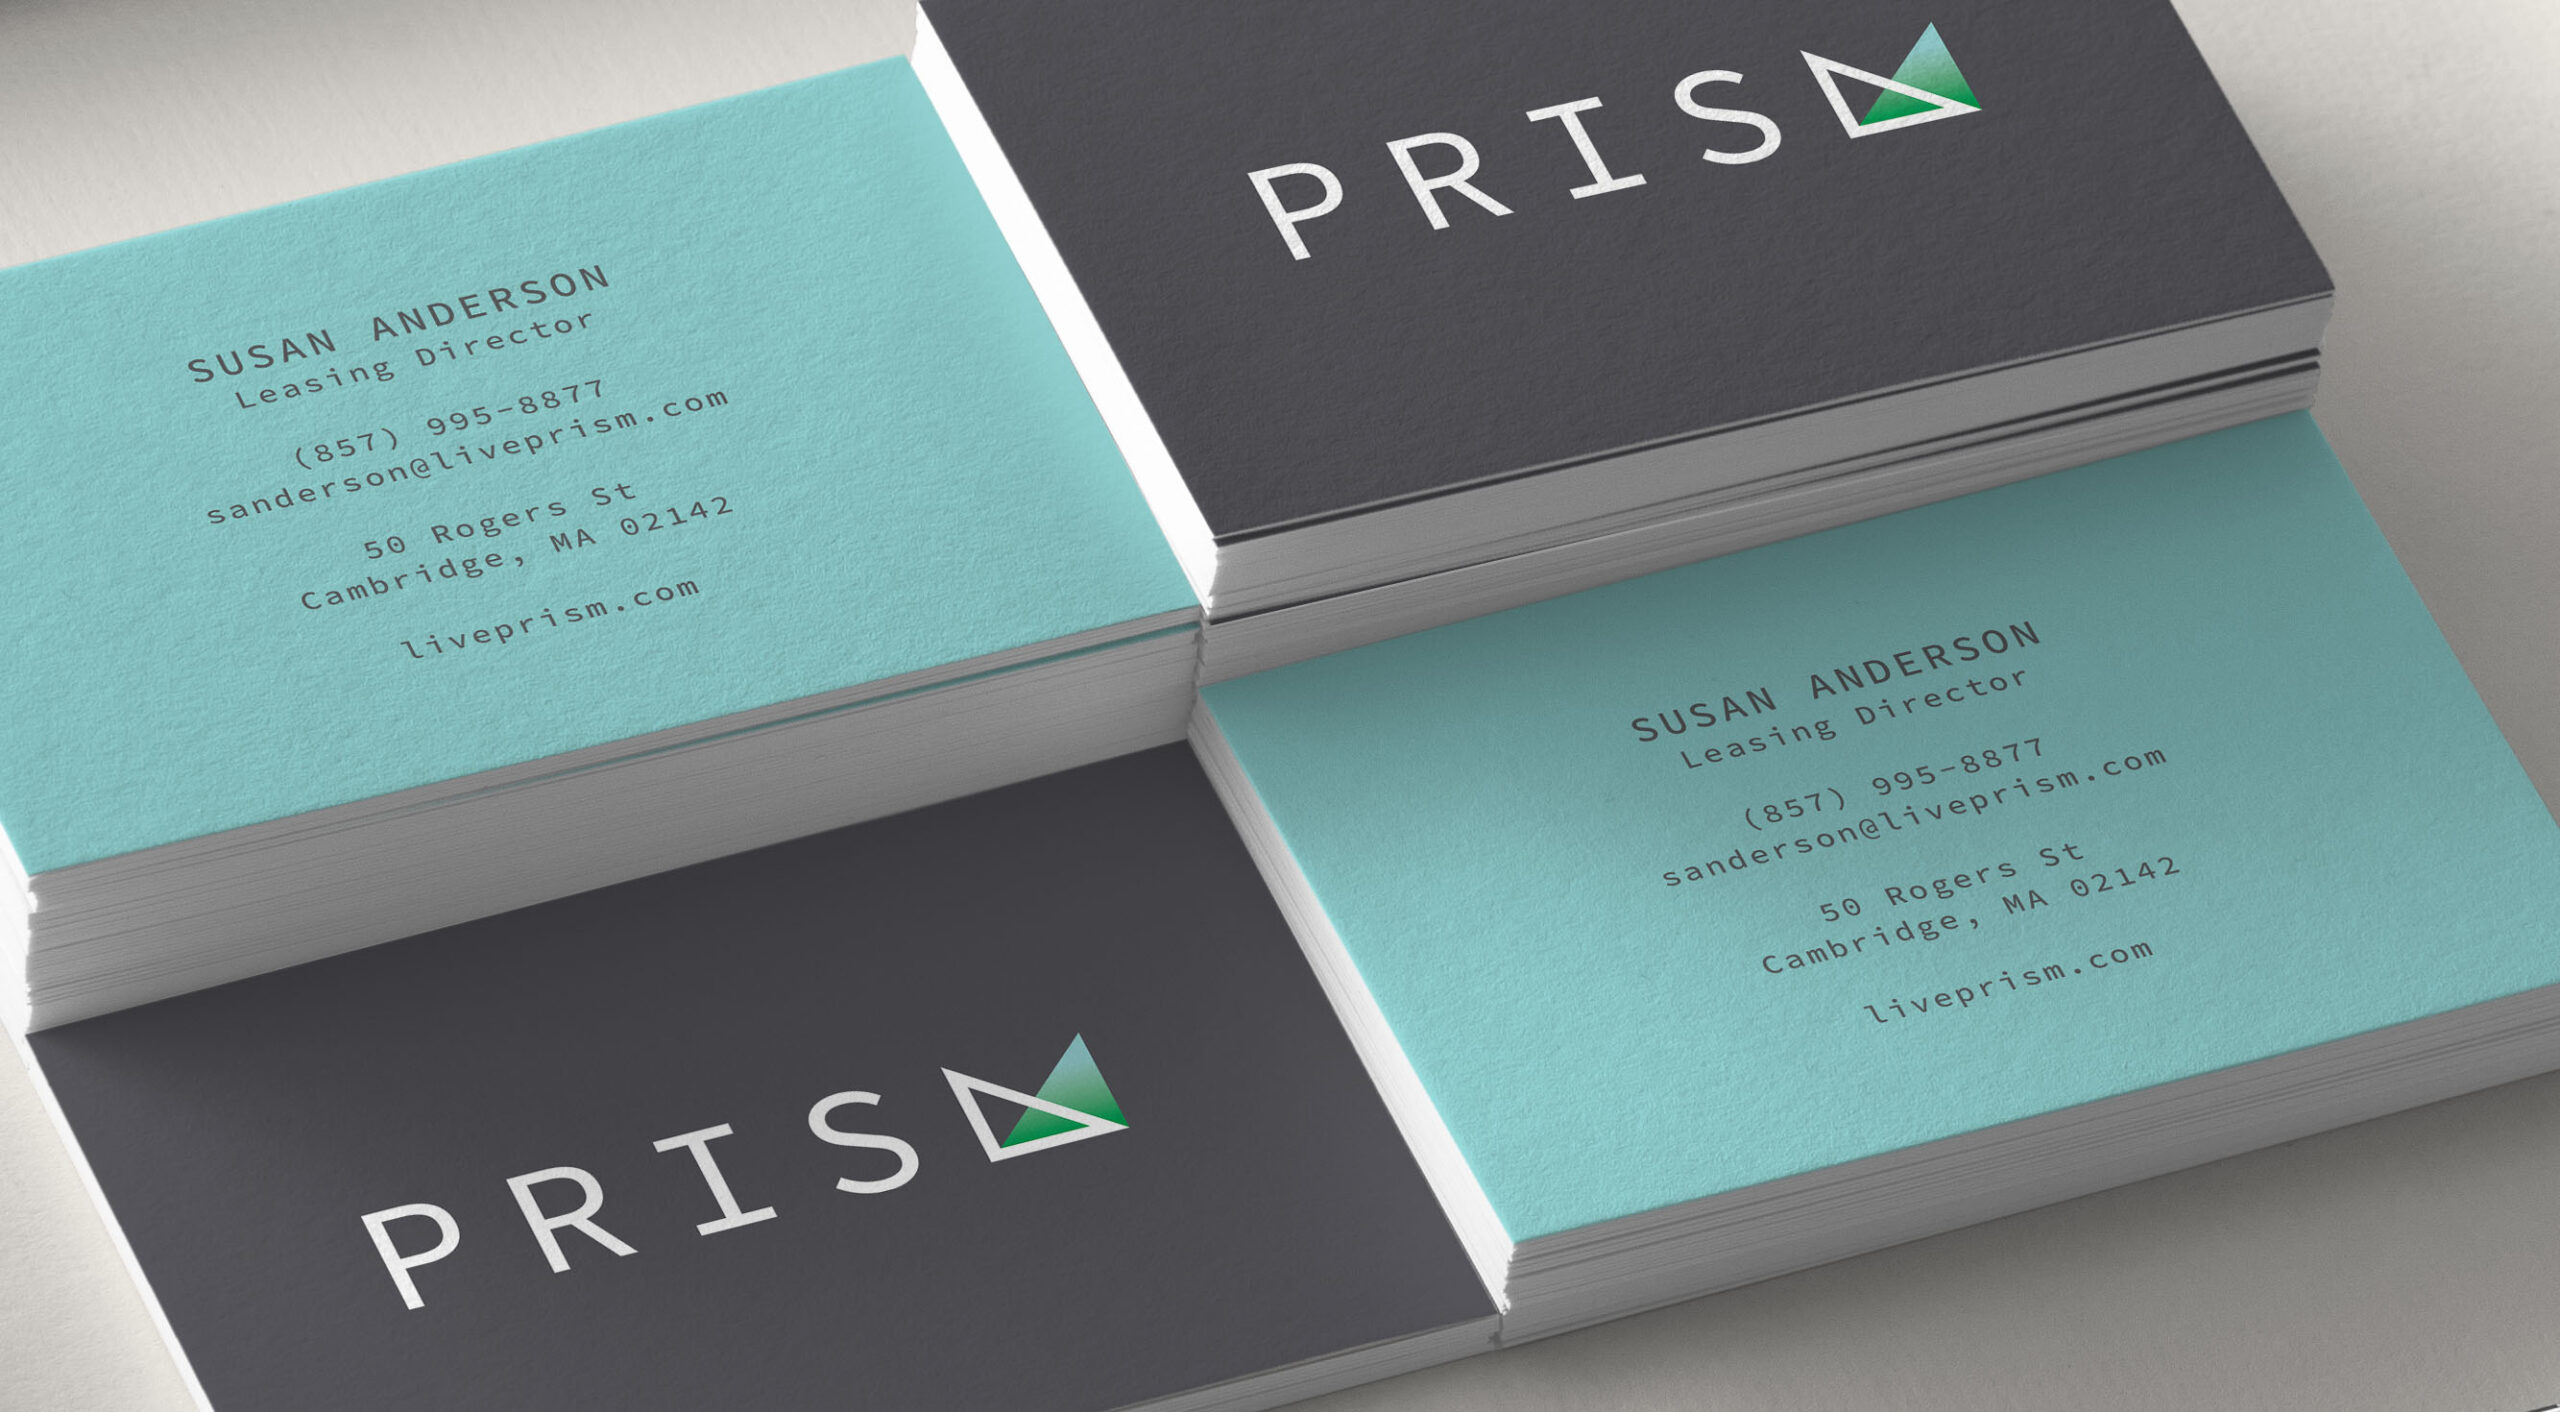 prism-apartments stacked business cards blue green